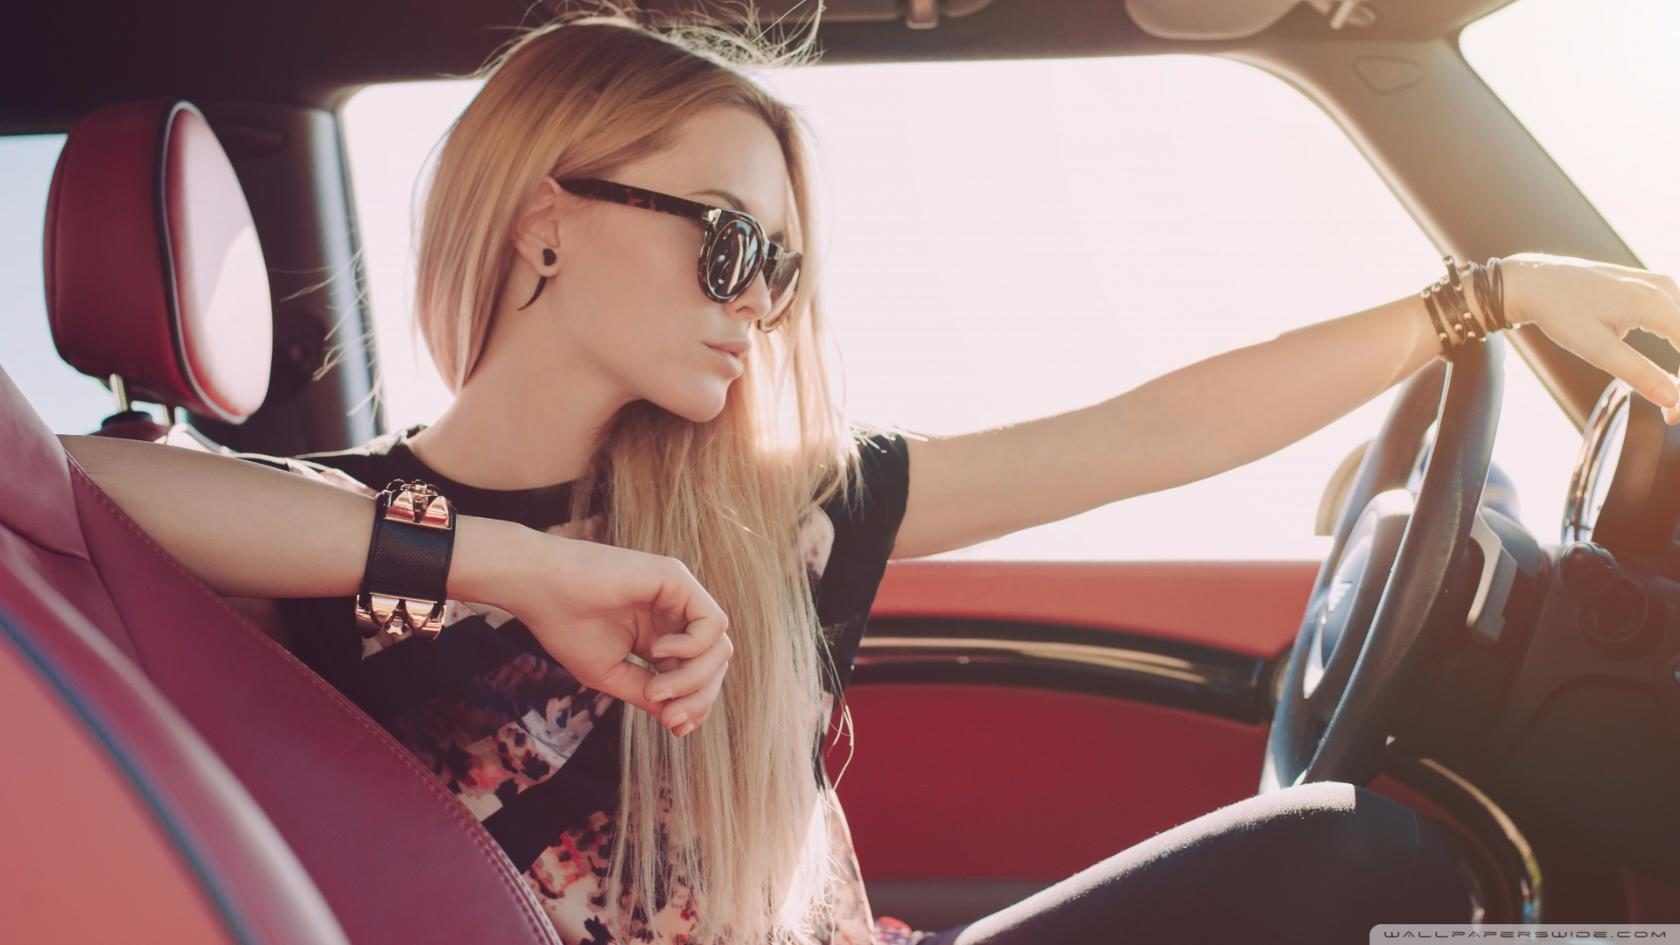 People 1680x945 car women model blonde reeds women with cars women with shades car interior driving Felix Britanskiy